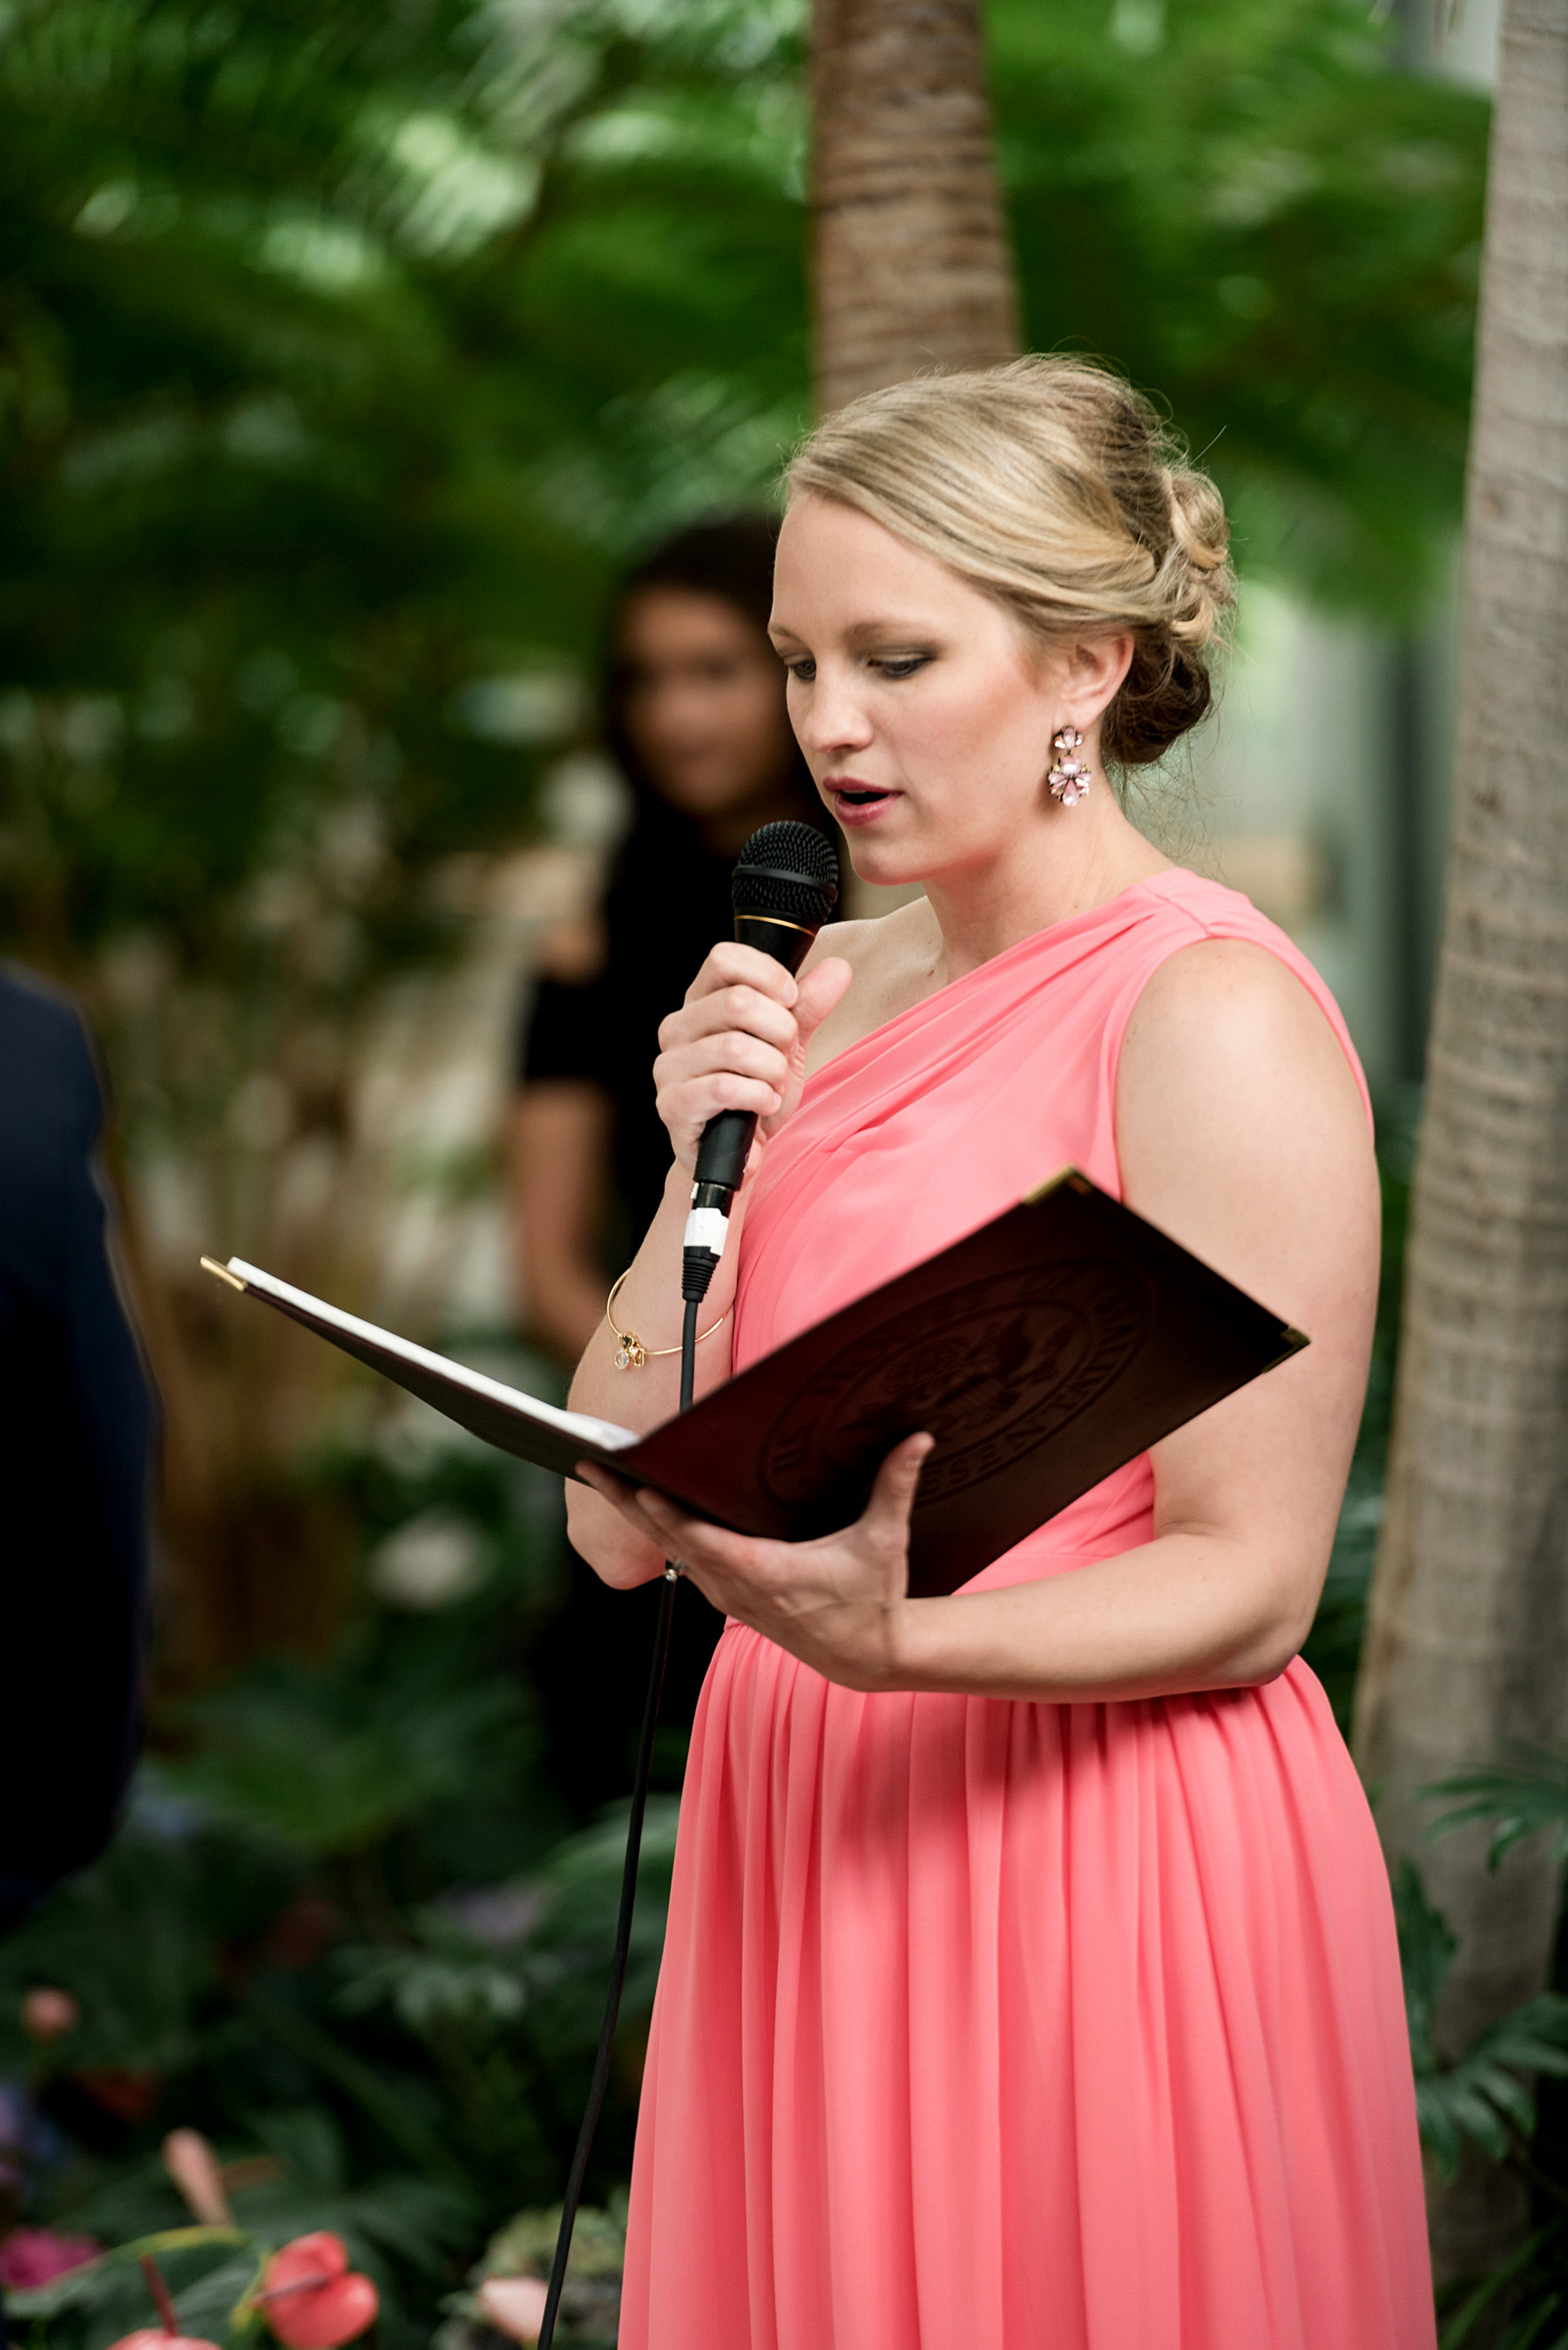 photo of ceremony at jewel box by ashley fisher photography